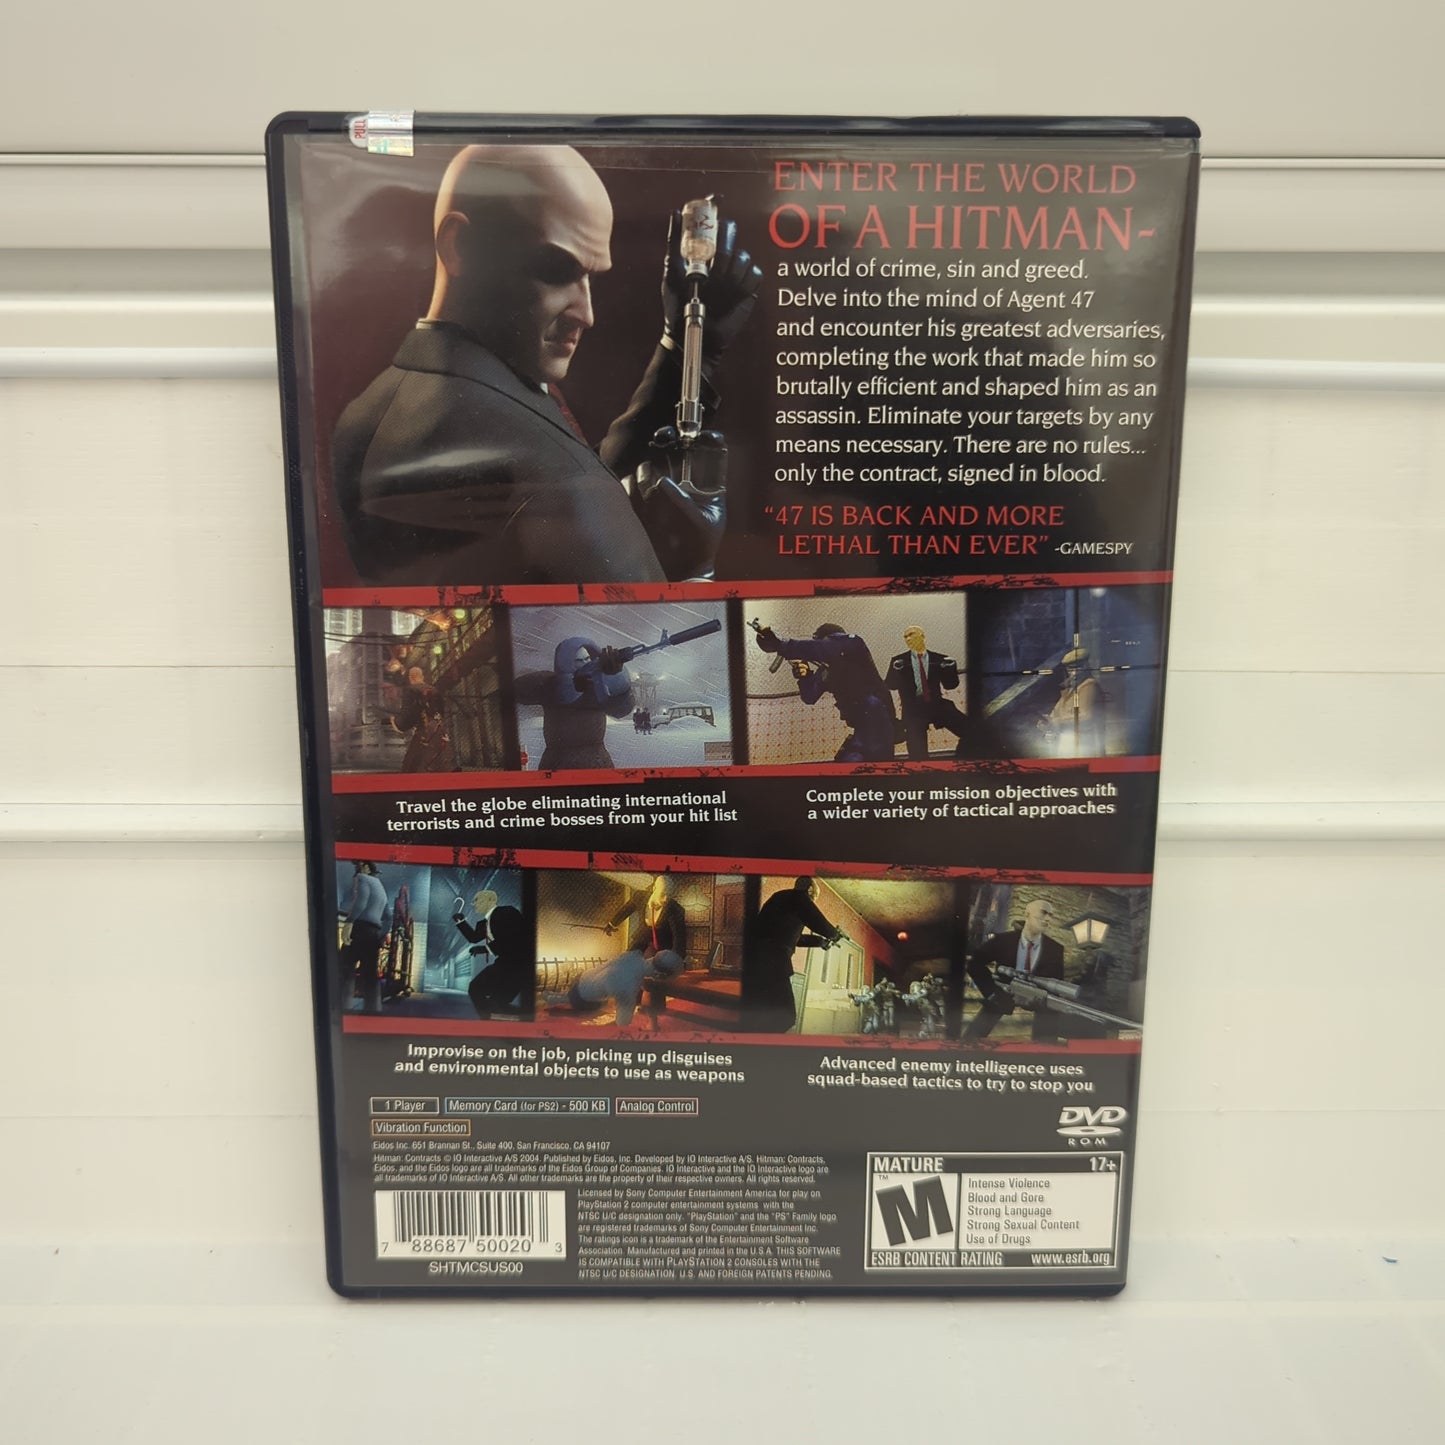 Hitman Contracts - Playstation 2